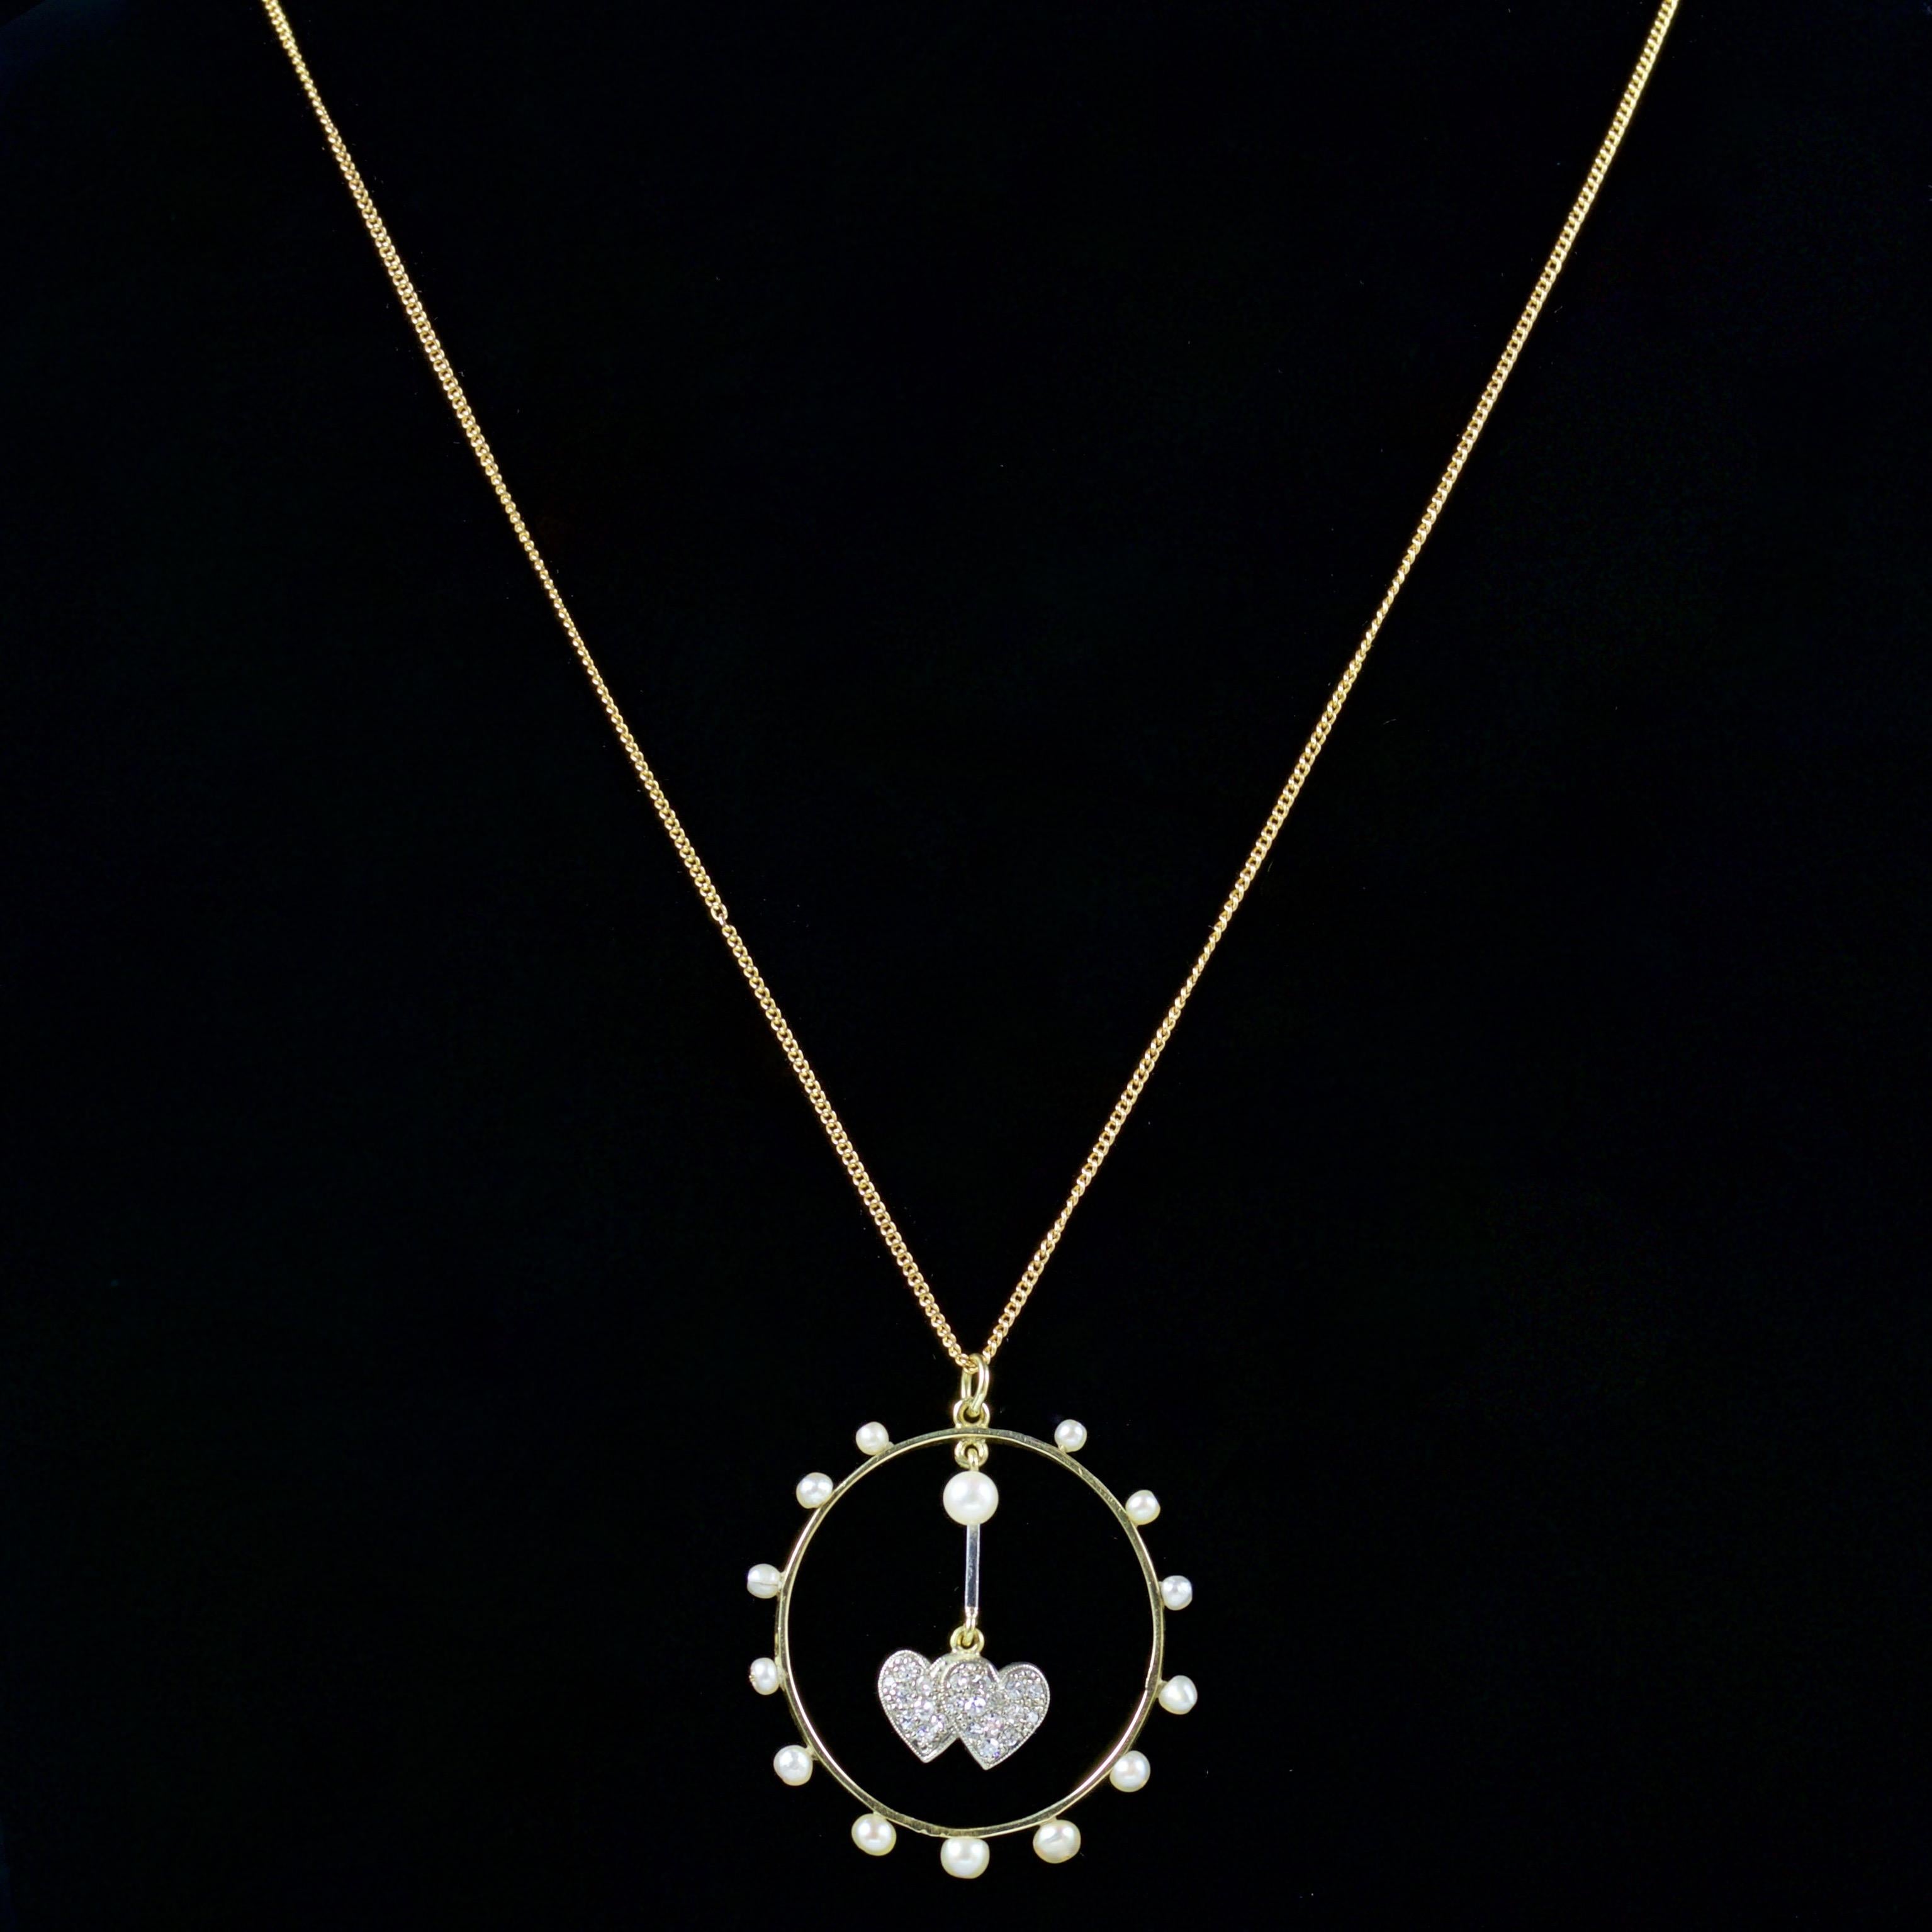 This fabulous Edwardian double heart Diamond pendant is set in 18ct Yellow Gold, Circa 1915.

The pendant is adorned with a halo of Pearls, with a double heart in the centre which hangs freely and set in a Diamonds.

There are 0.60ct of Diamonds,